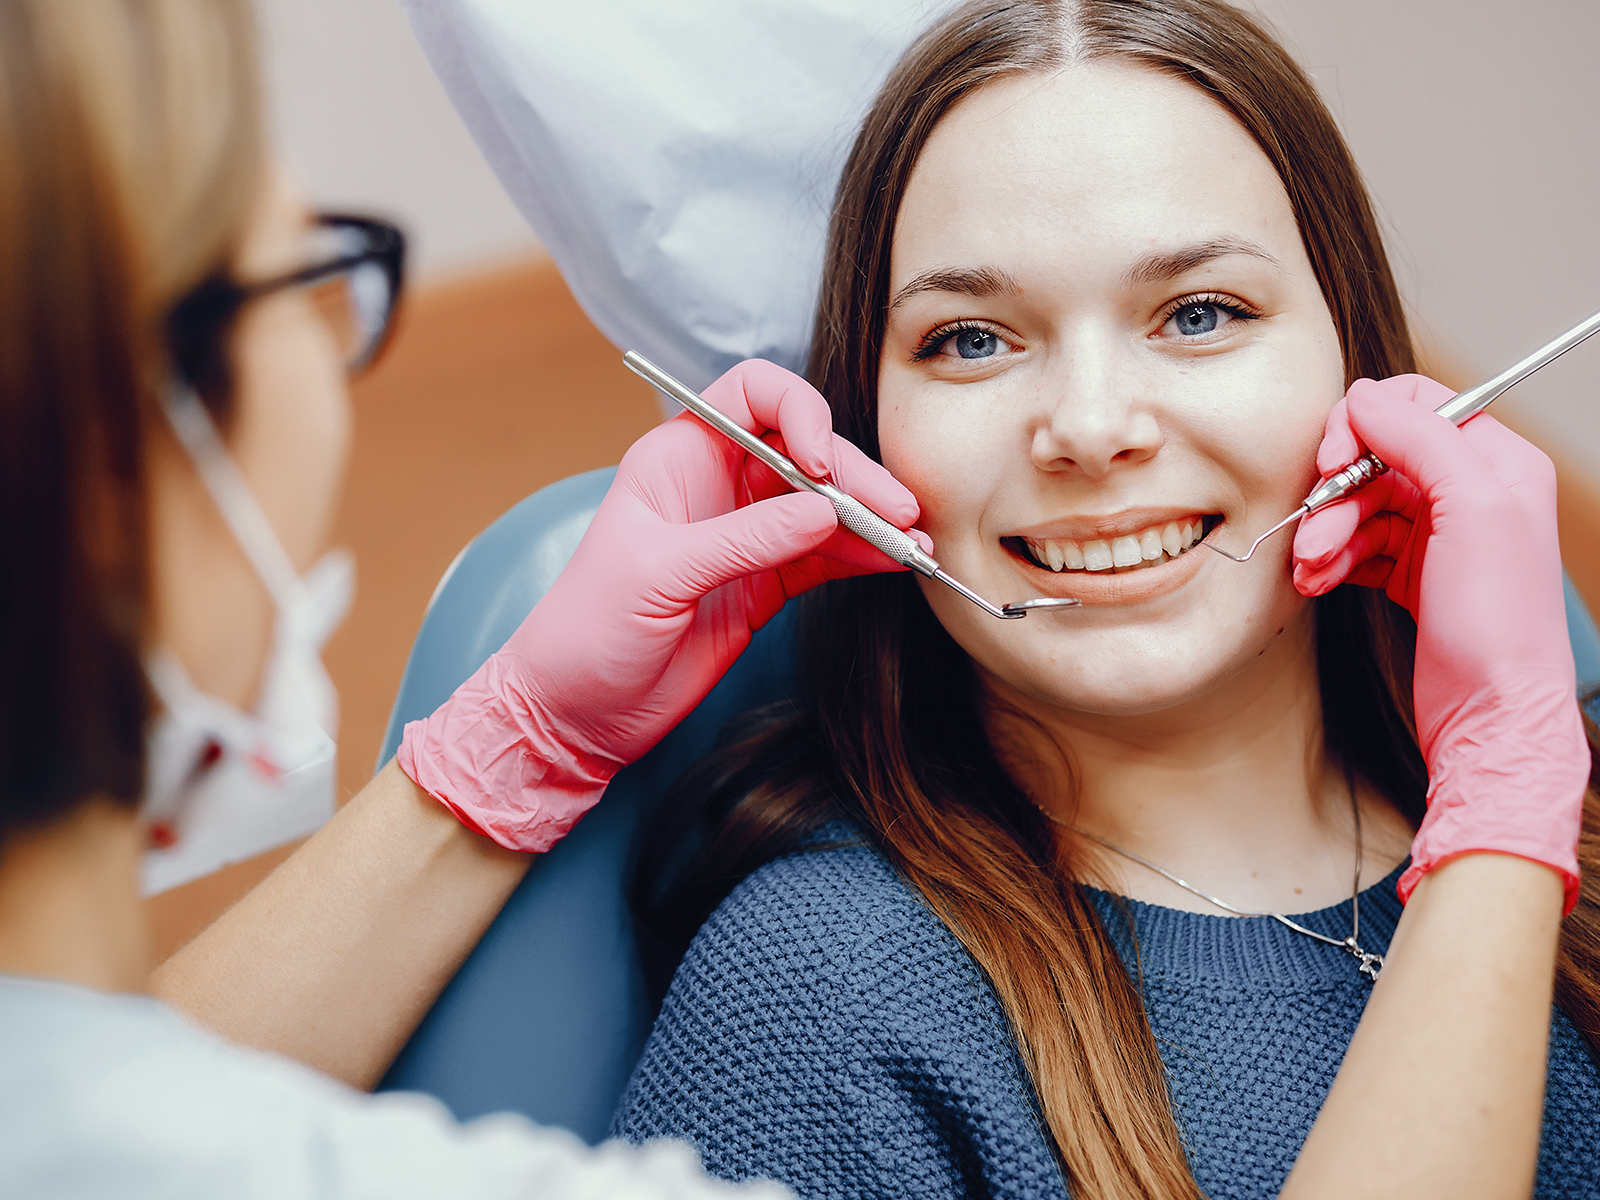 Can A General Dentist Do Cosmetic Dentistry?